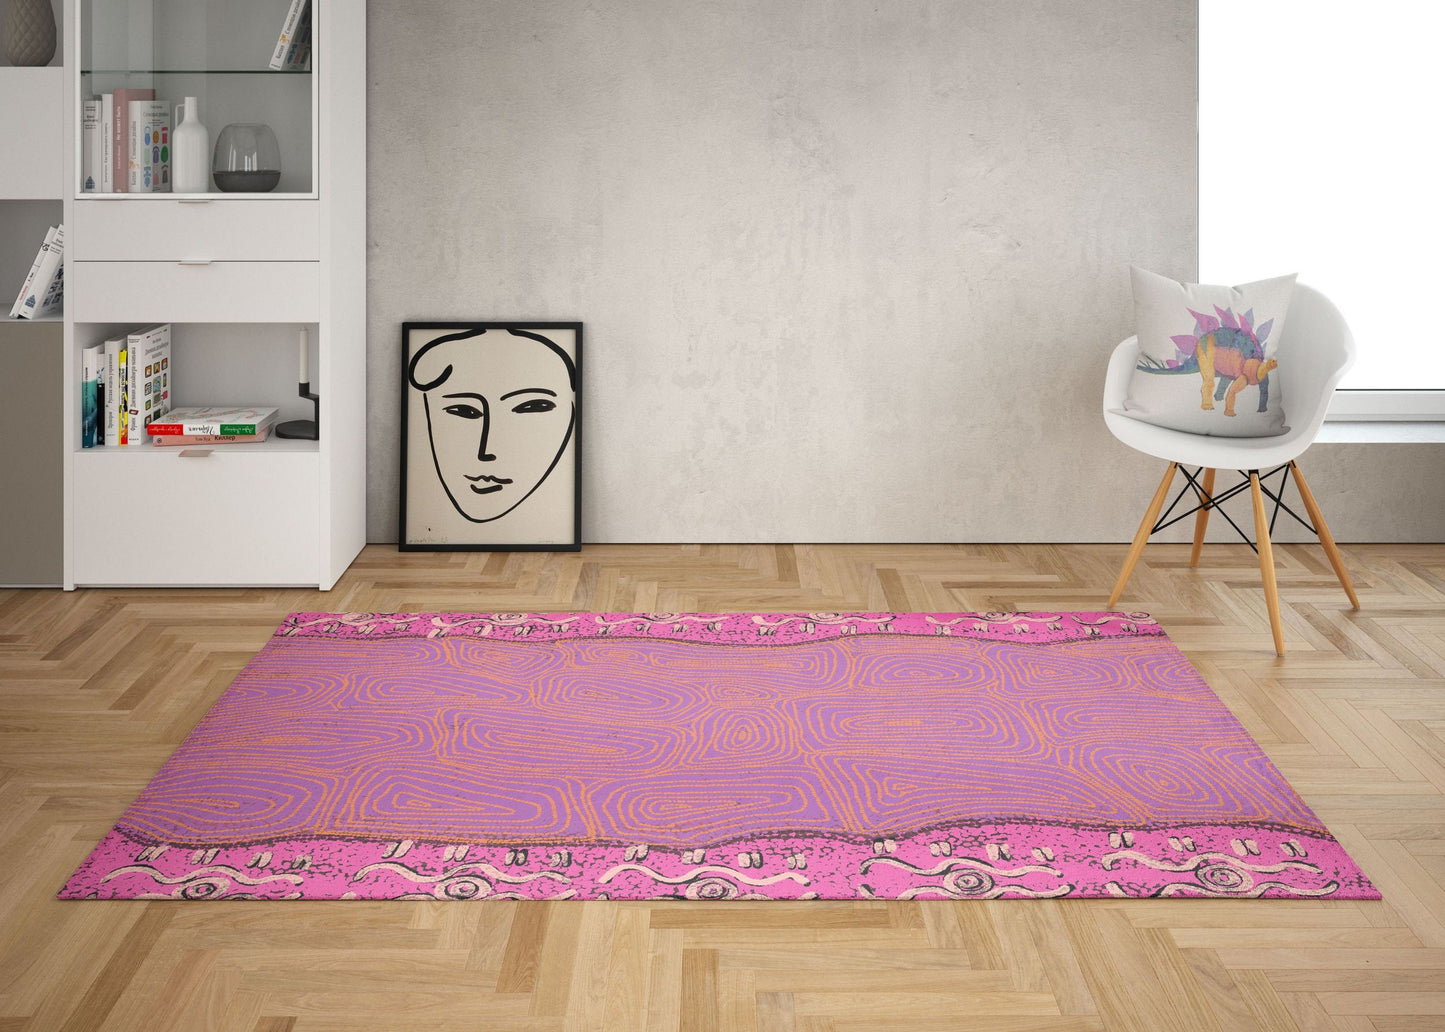 Floor Mat, Durable Rug, Rectangle Rugs, Pink And Yellow Rug, Austrialian Aboriginal Rug, Contemporary Rug, Bedroom Carpet, Made In USA